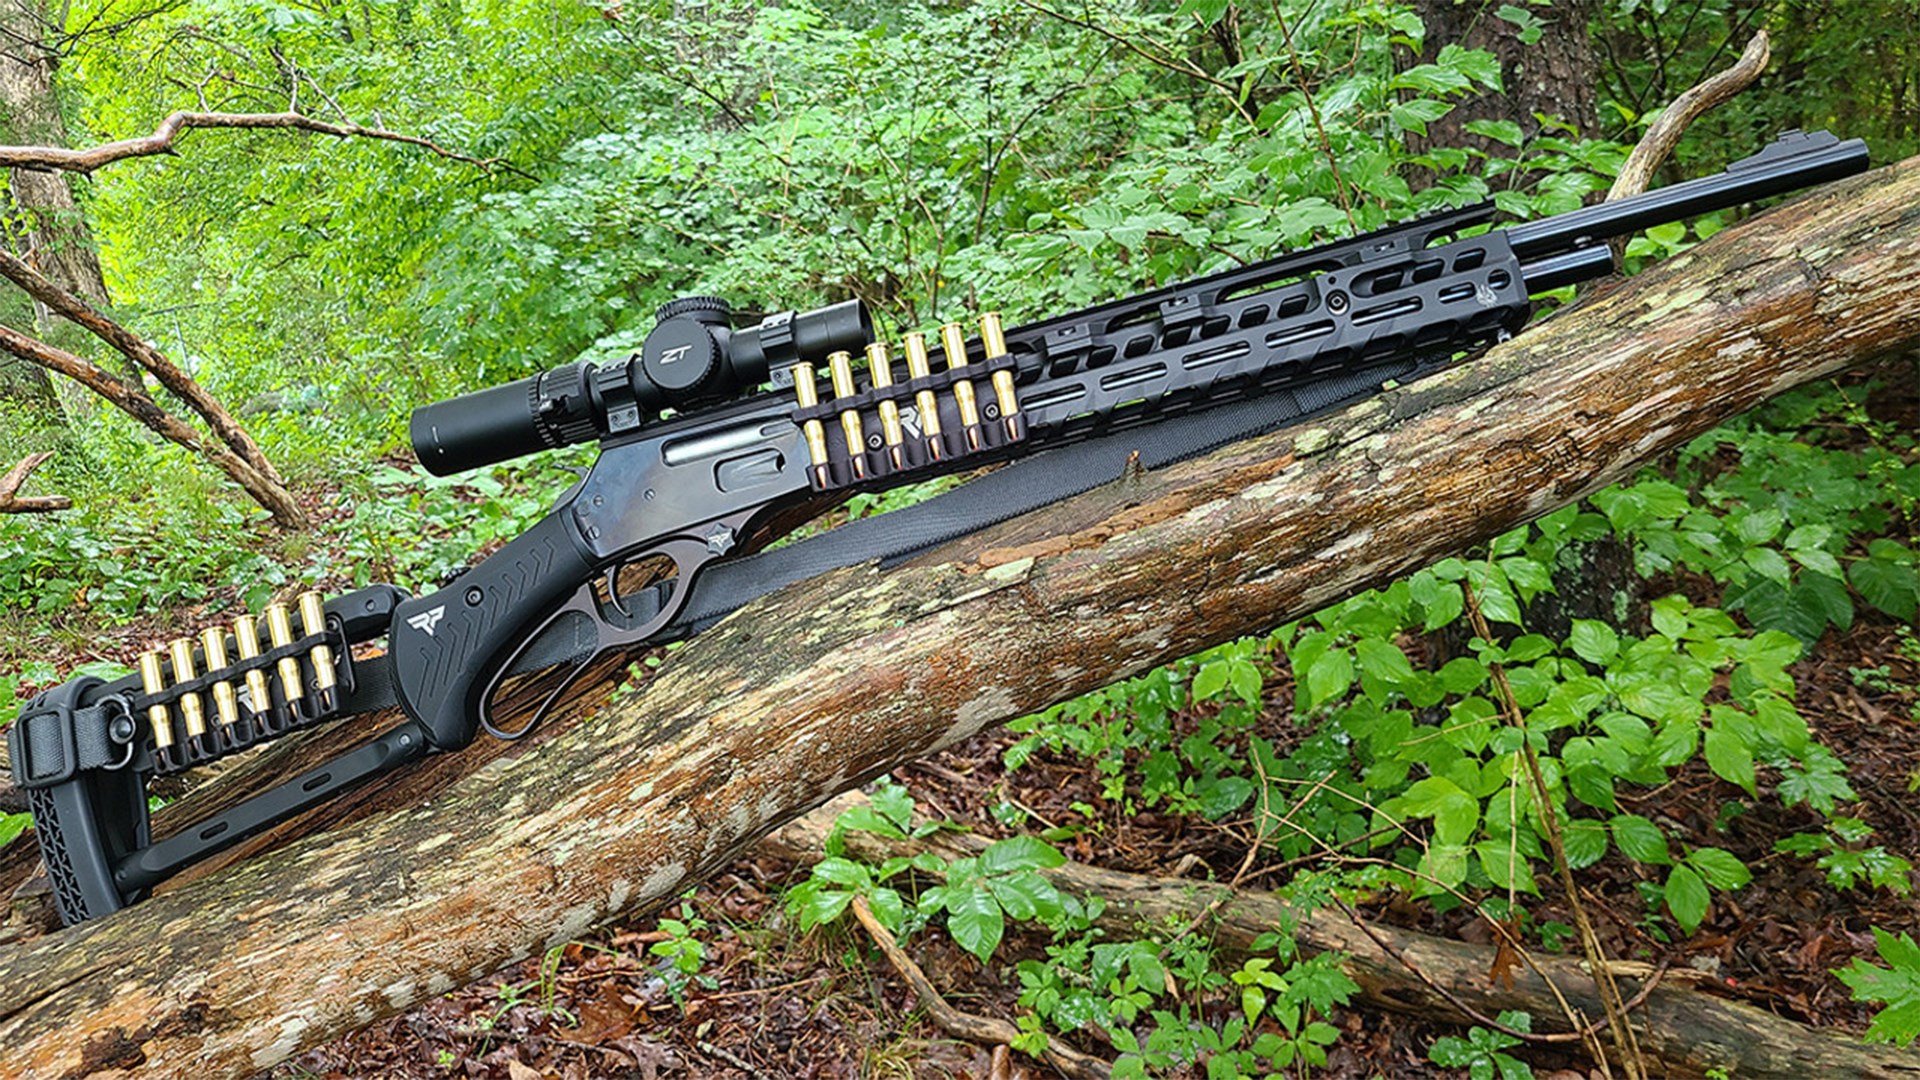 Rossi R95 lever-action rifle shown with tactical aftermarket accessories in the woods.